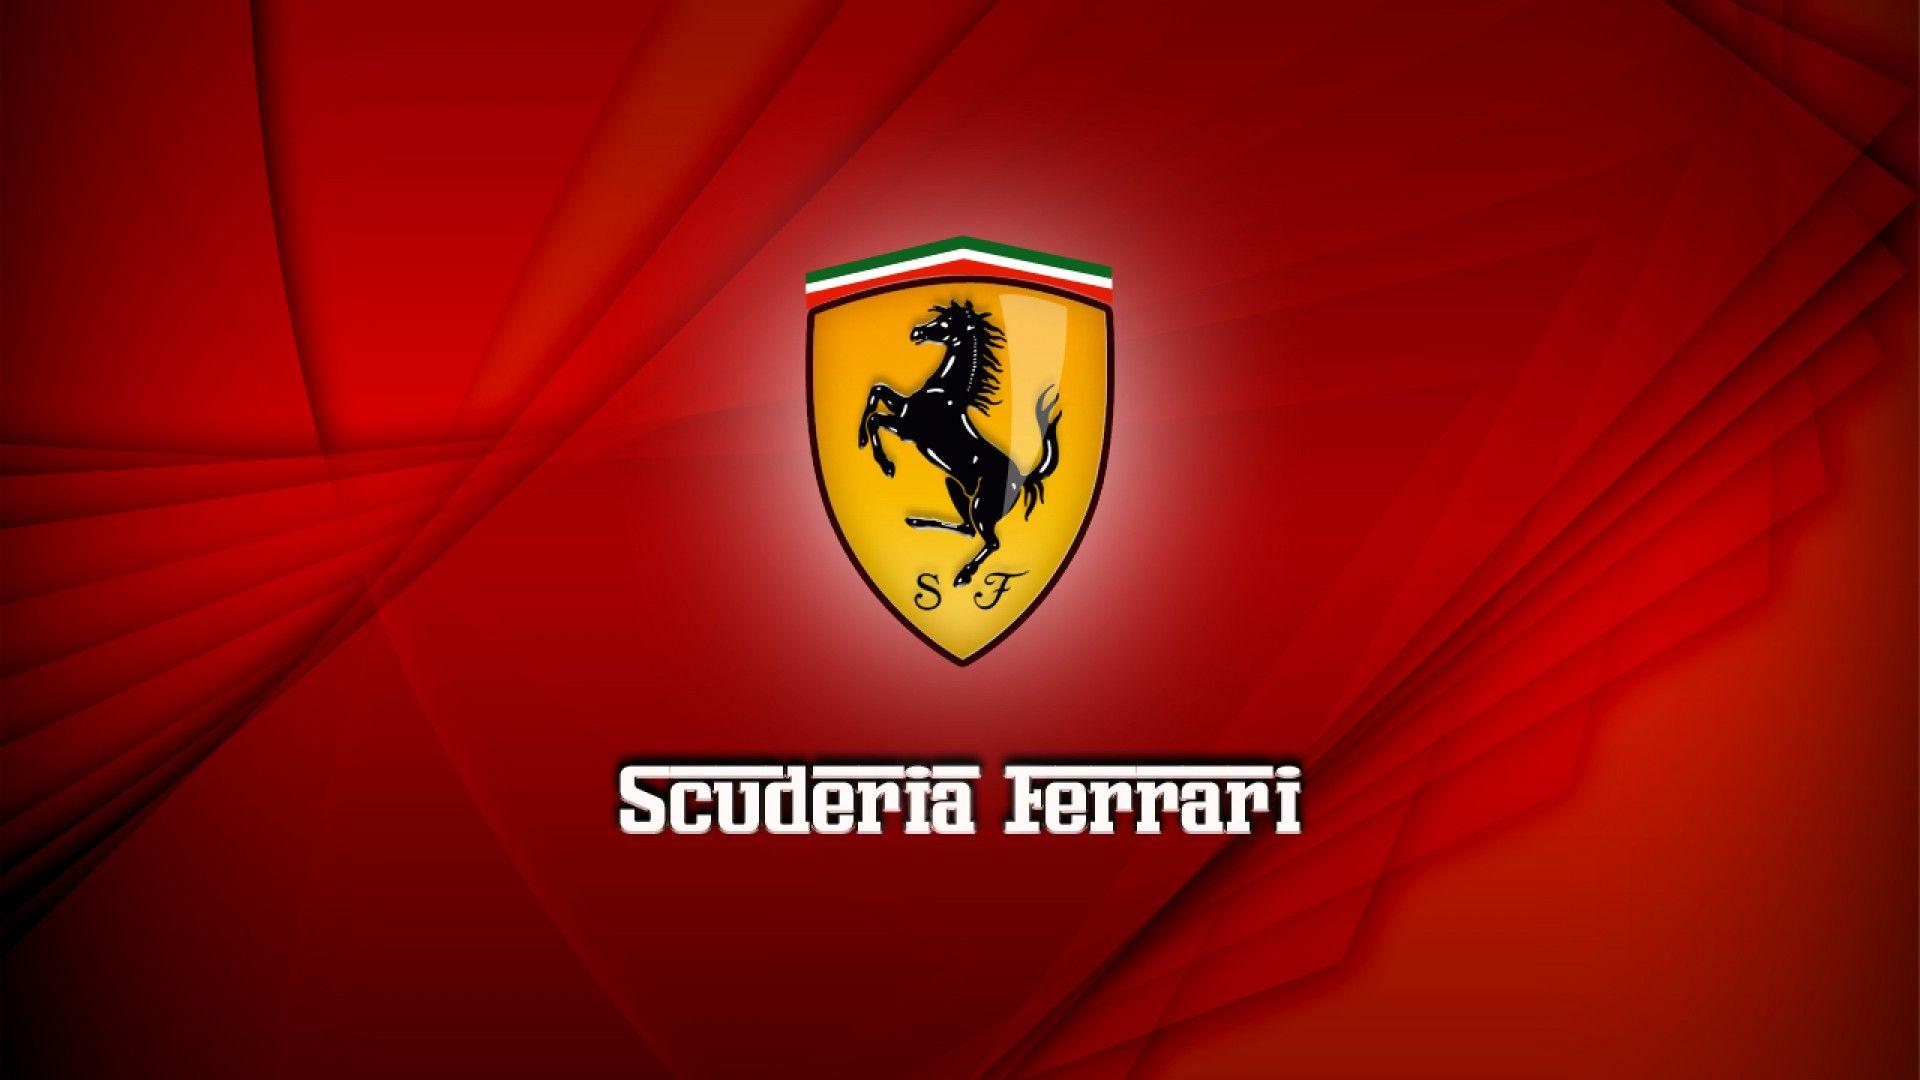 Coolest Collection of Ferrari Wallpaper & Background In HD